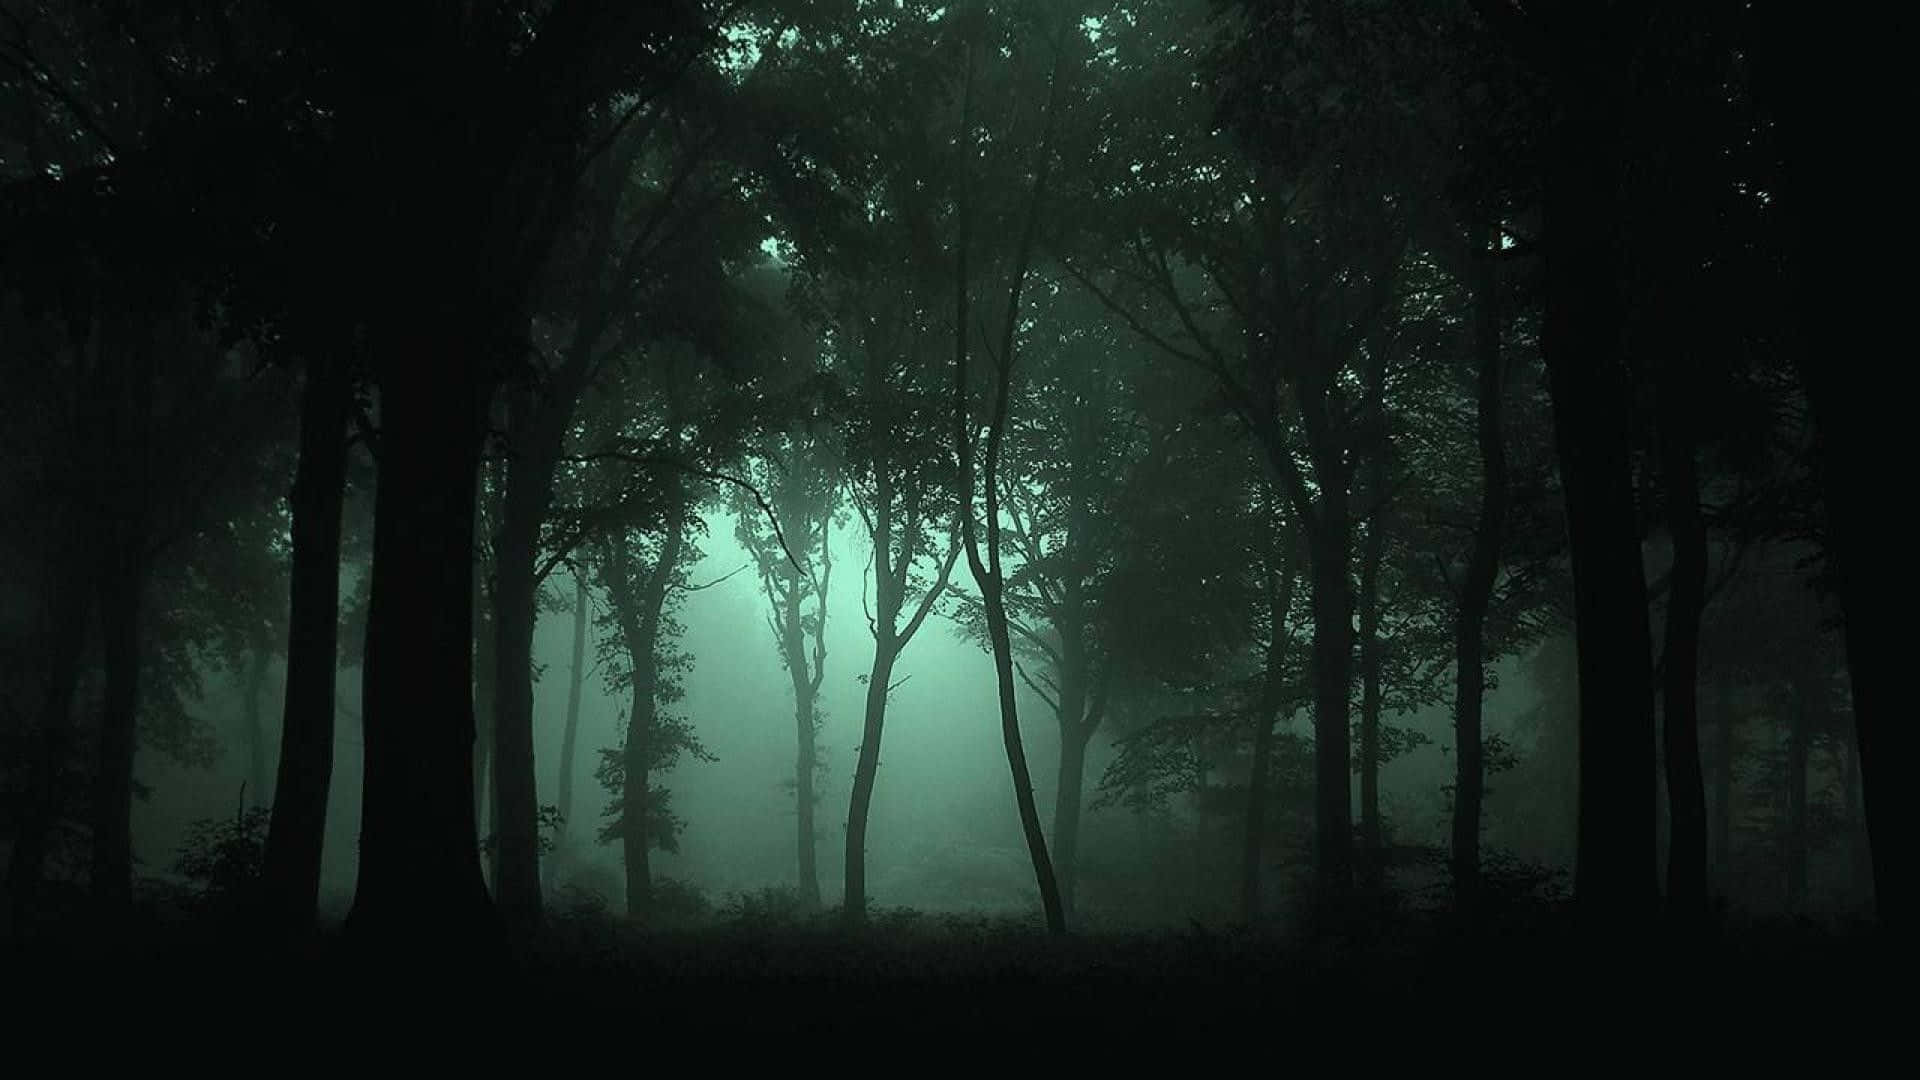 A Timeless Path Through The Darkest Of Forests